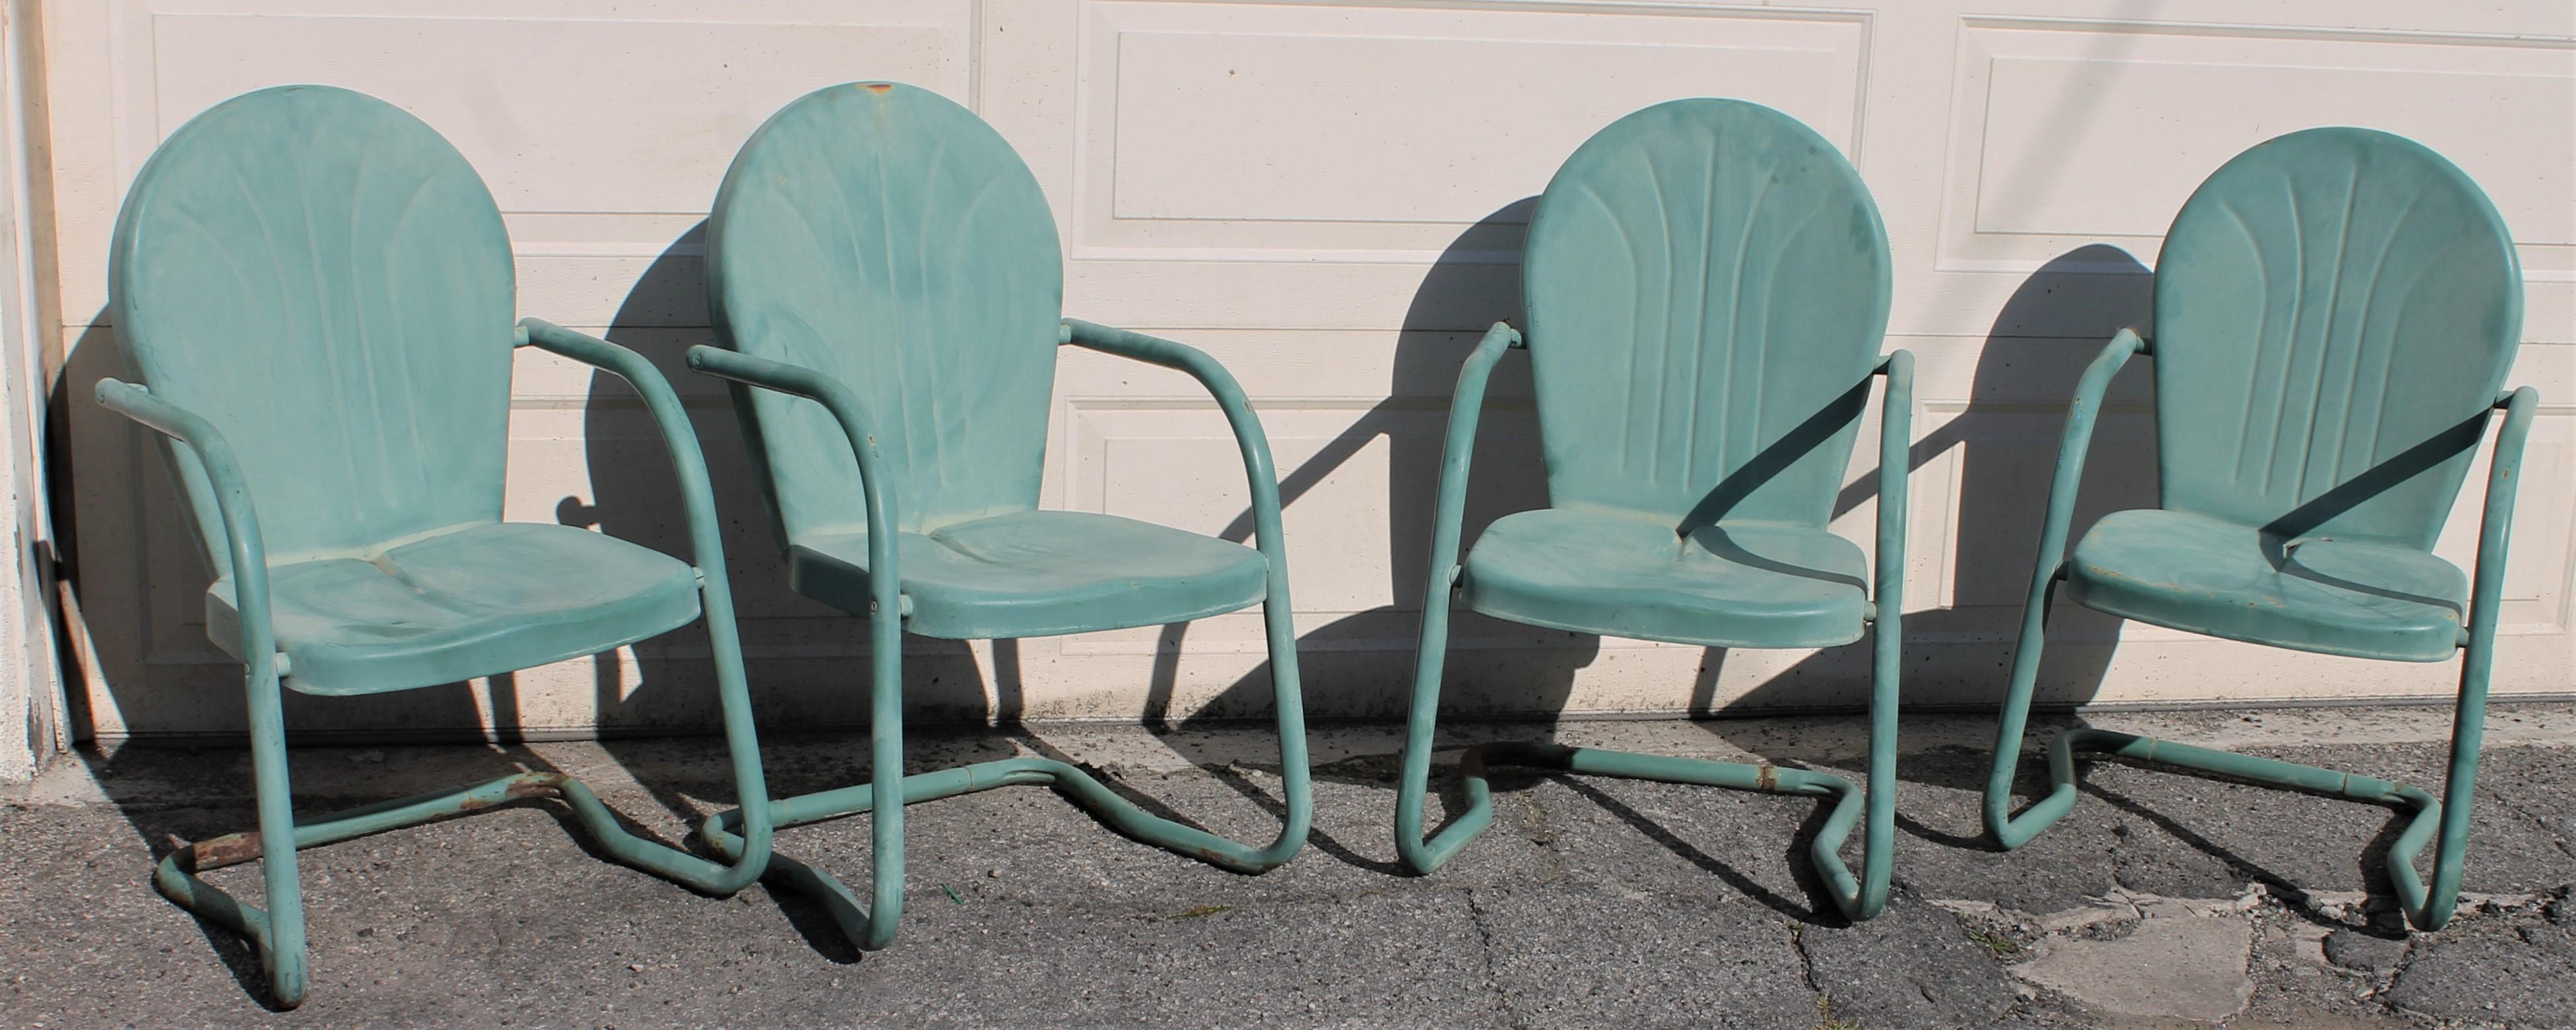 Midcentury original sea foam green painted metal set of four out door lawn or beach chairs. They are in great condition minor wear consistent from age and use. On 1stdibs site there is a rocking chair in the same surface and form.